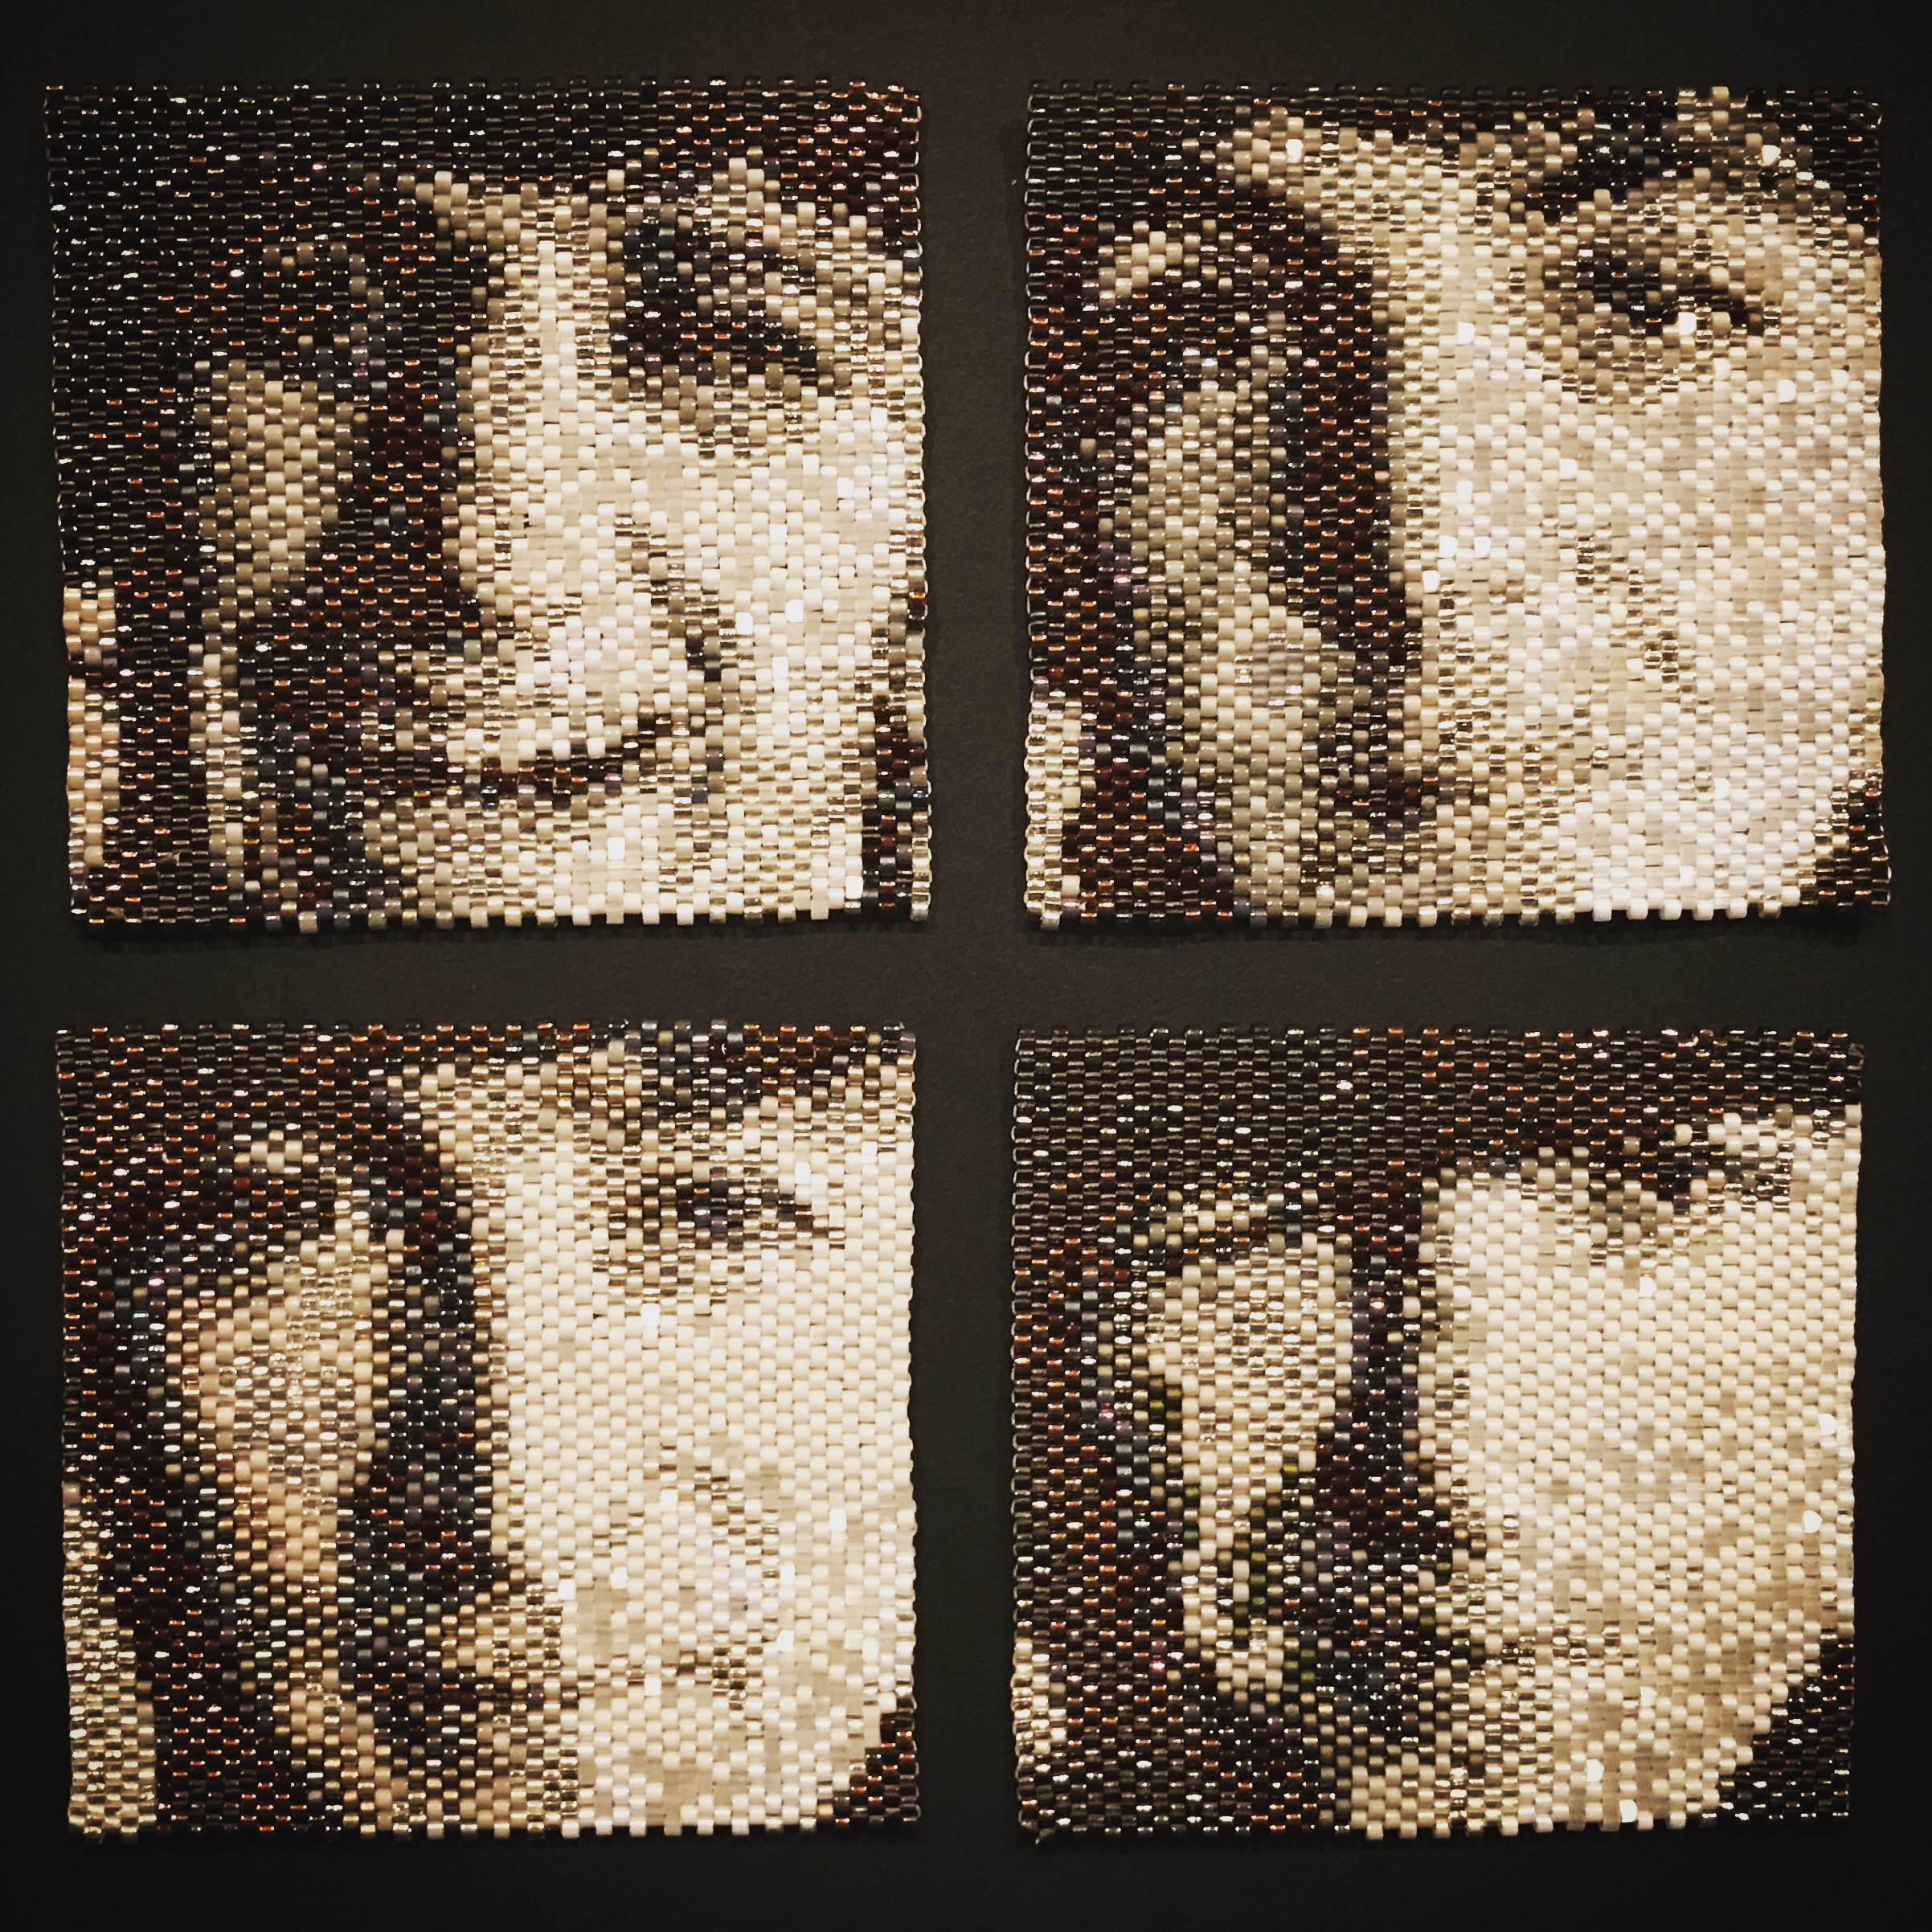 The Beatles made with beads.